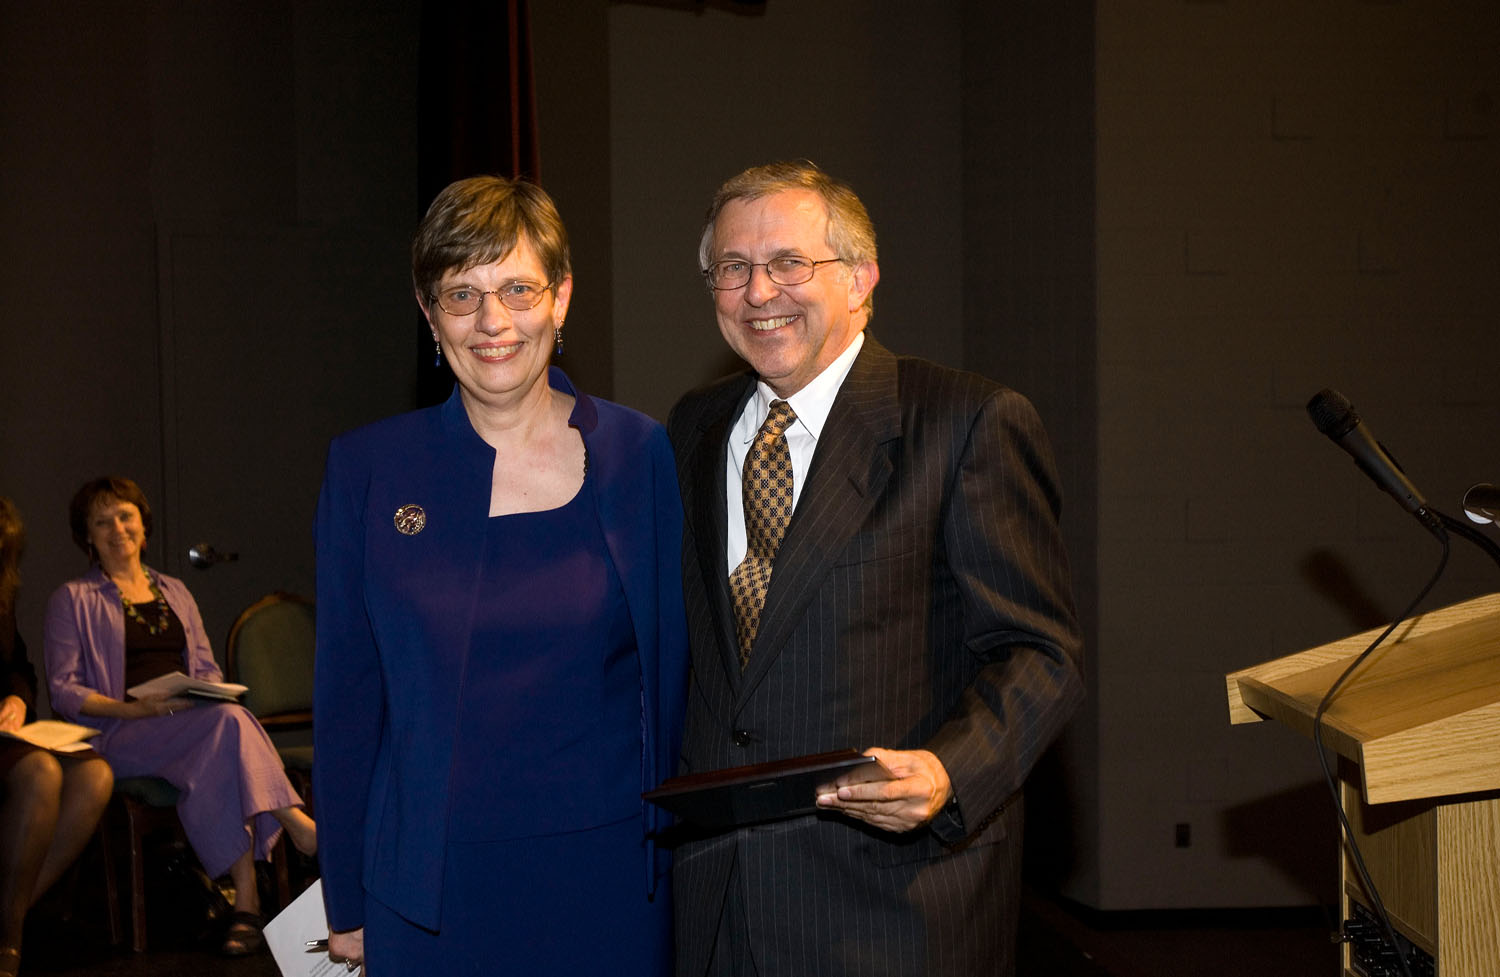 Chair of the Department of English Carolyn Rude (left) and Virginia Tech President Charles W. Steger at the first Steger Award presentations.